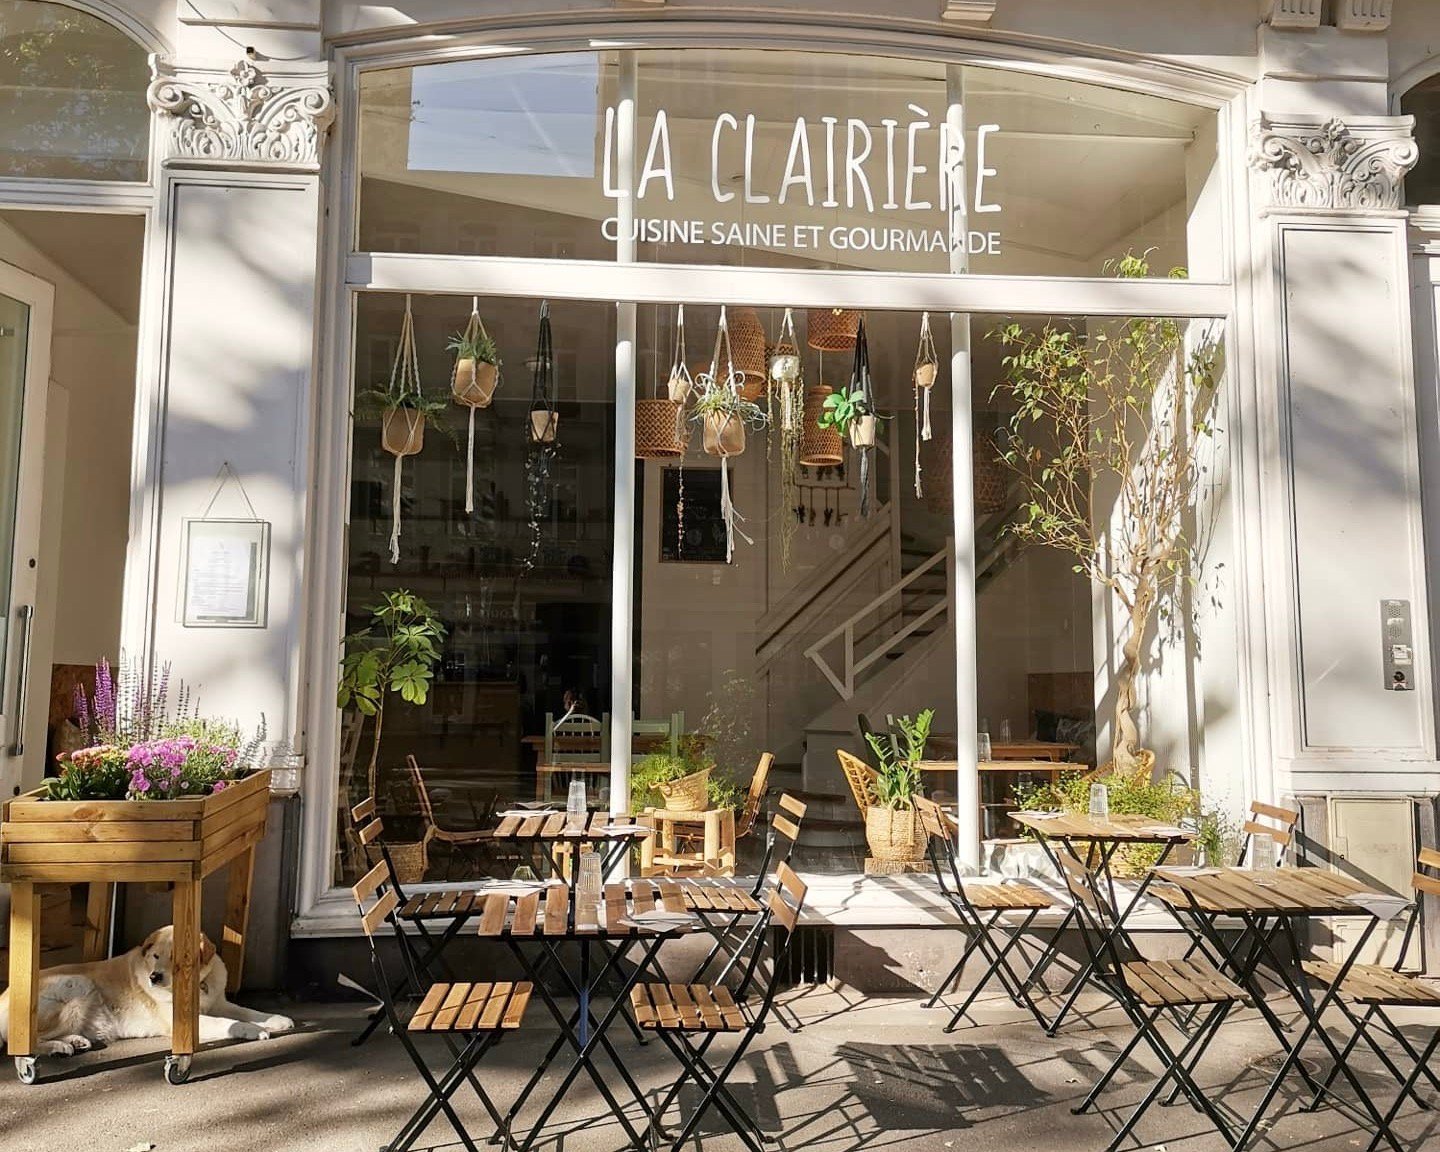 Located in the city center, La Clairière |Source: Lille By Mat